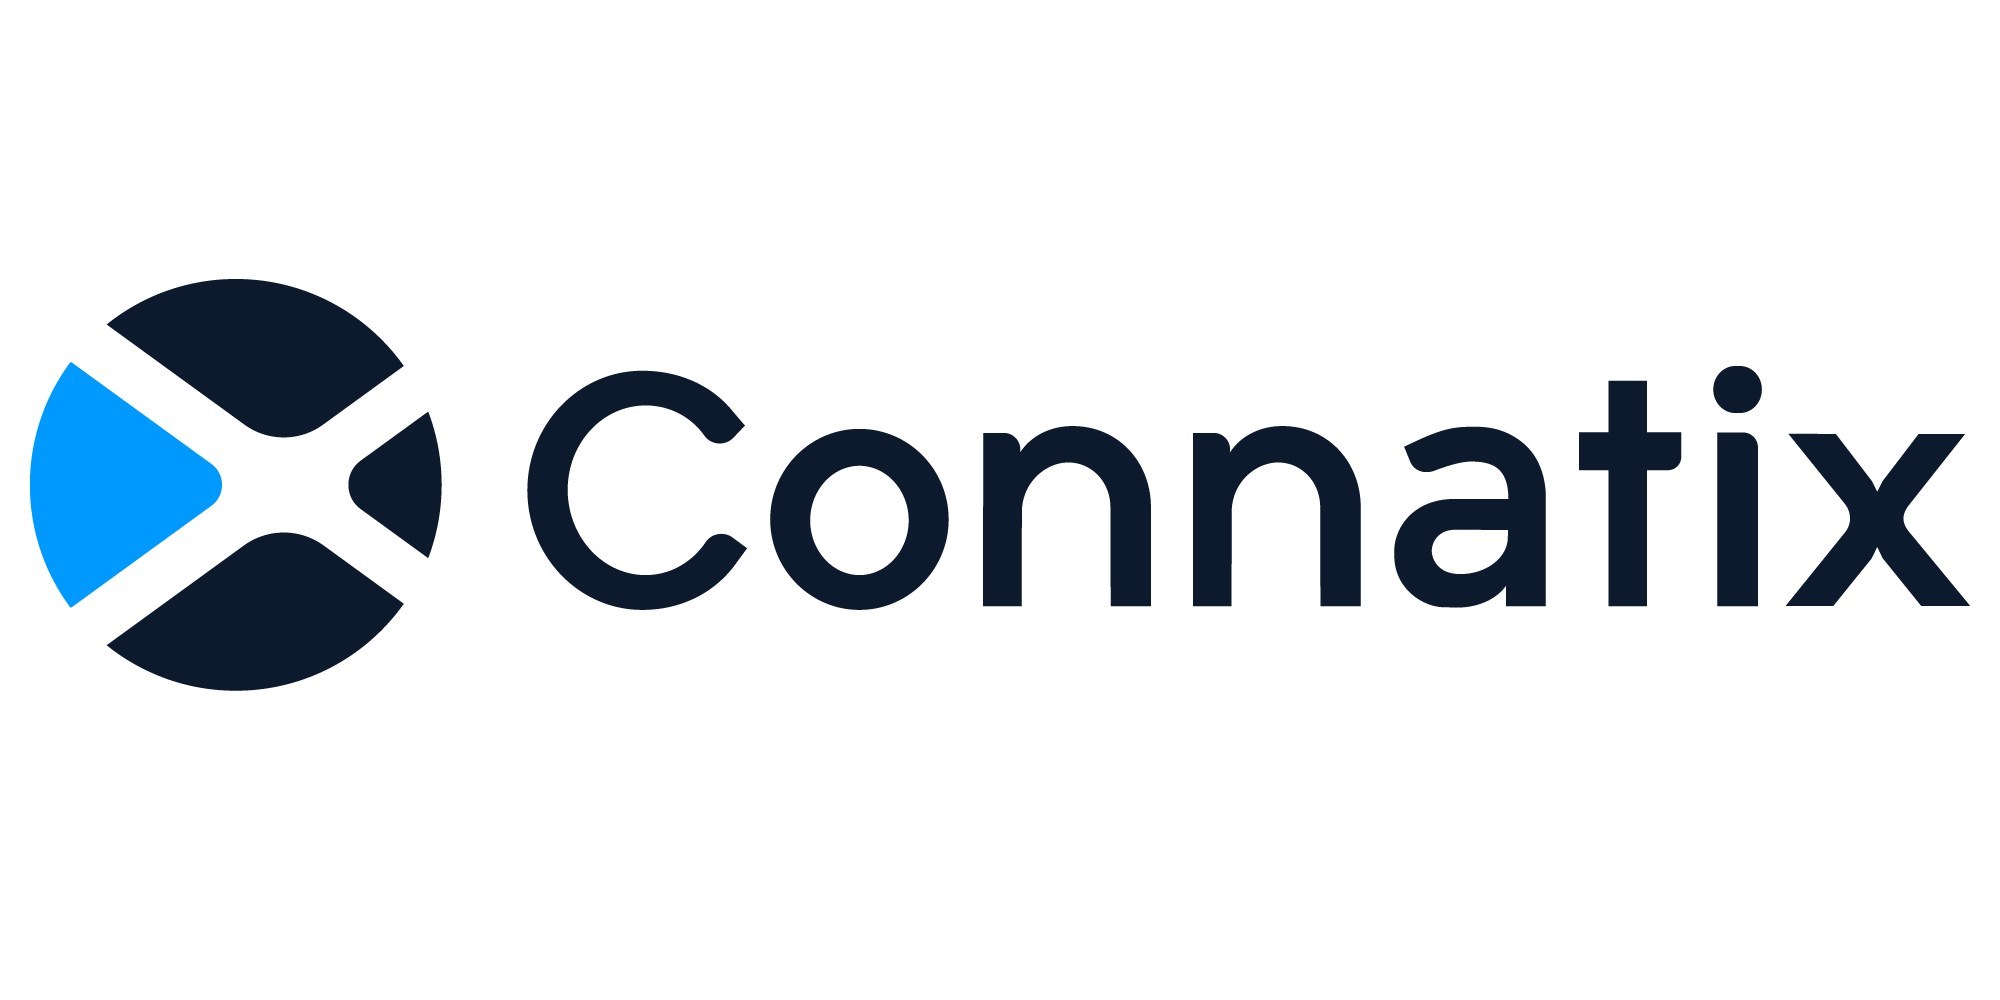 Connatix is a next-generation video technology platform for publishers. We believe in the power of engaging content and are on a mission to help publishers deliver successful videos without compromise. (PRNewsfoto/Connatix)